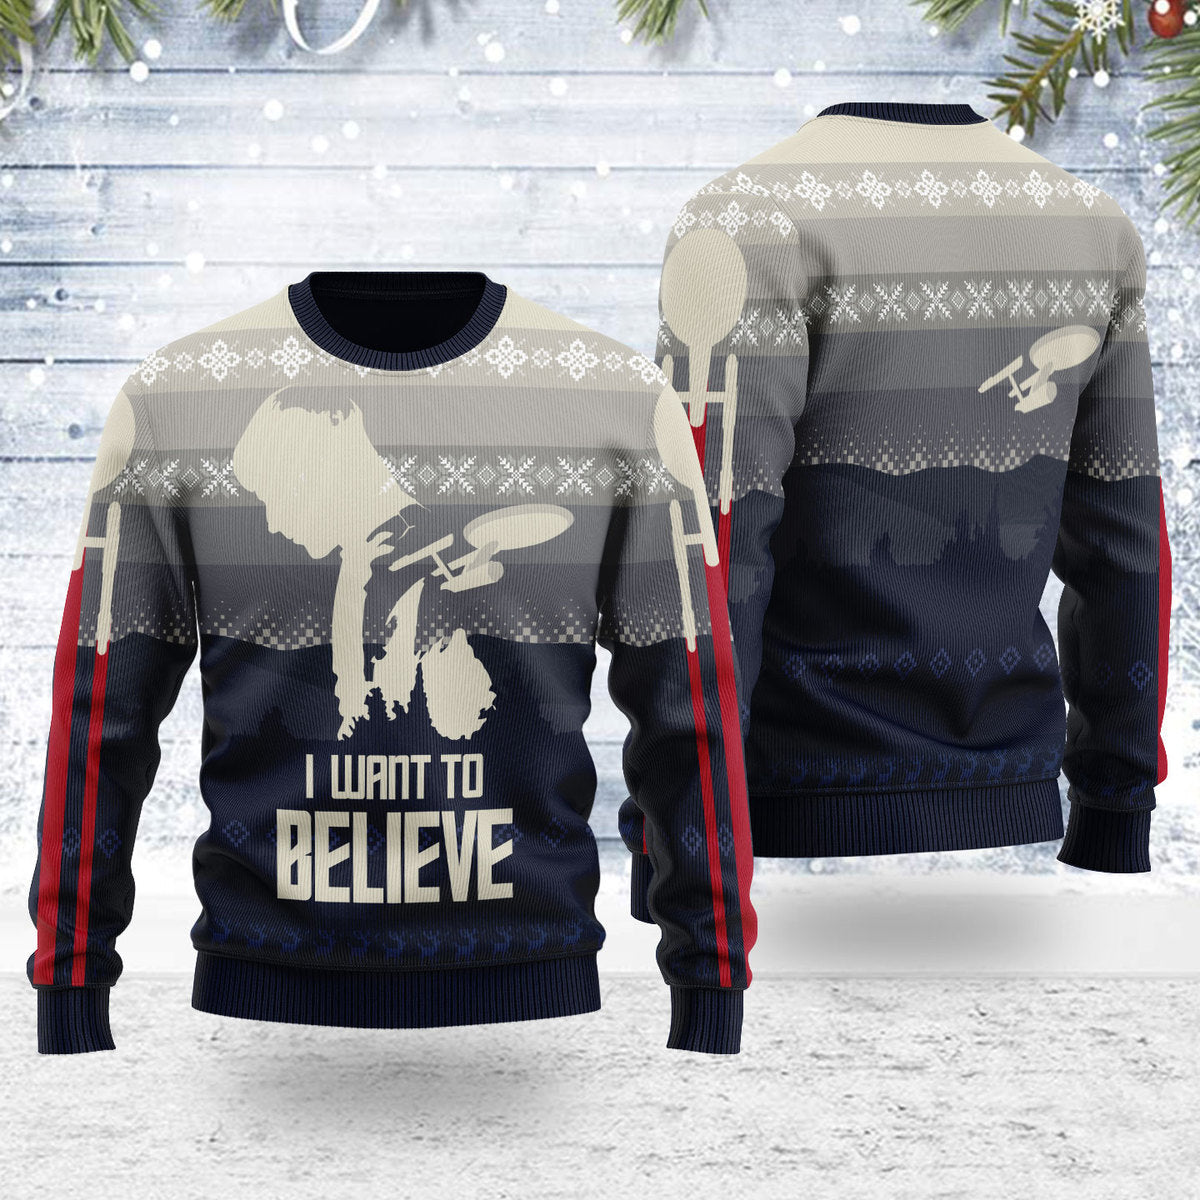 Star Trek I Want To Believe Christmas - Sweater - Ugly Christmas Sweater